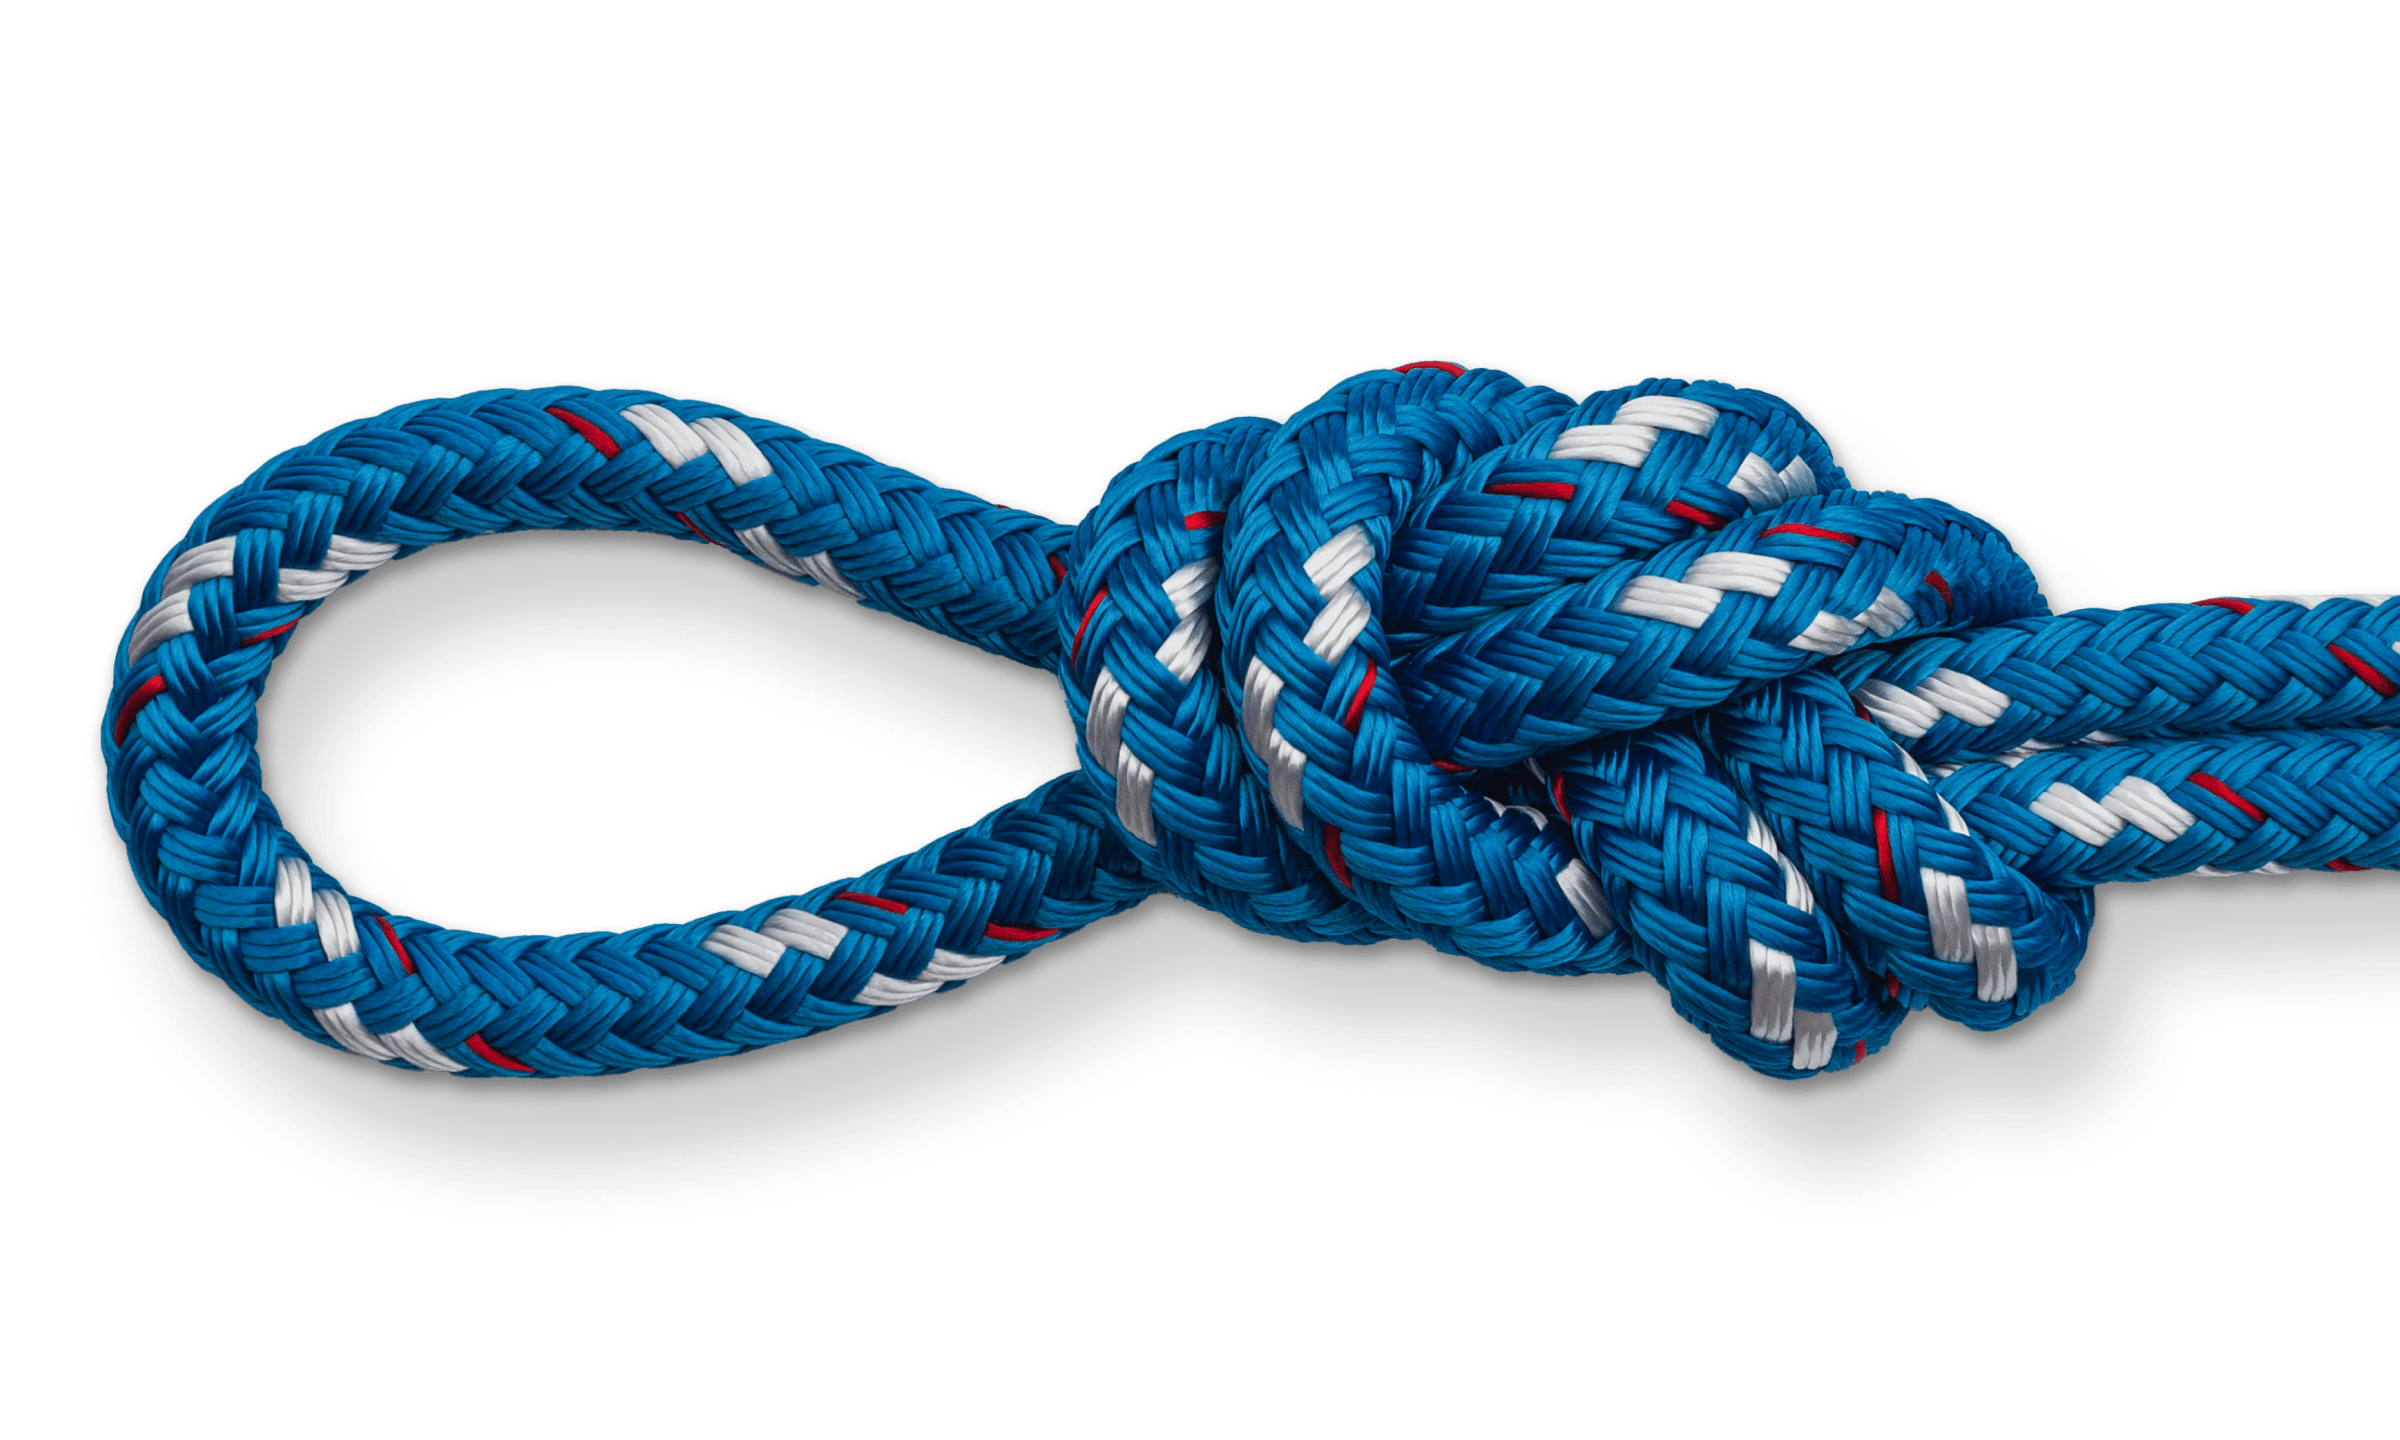 sta-set solid blue double braid rope